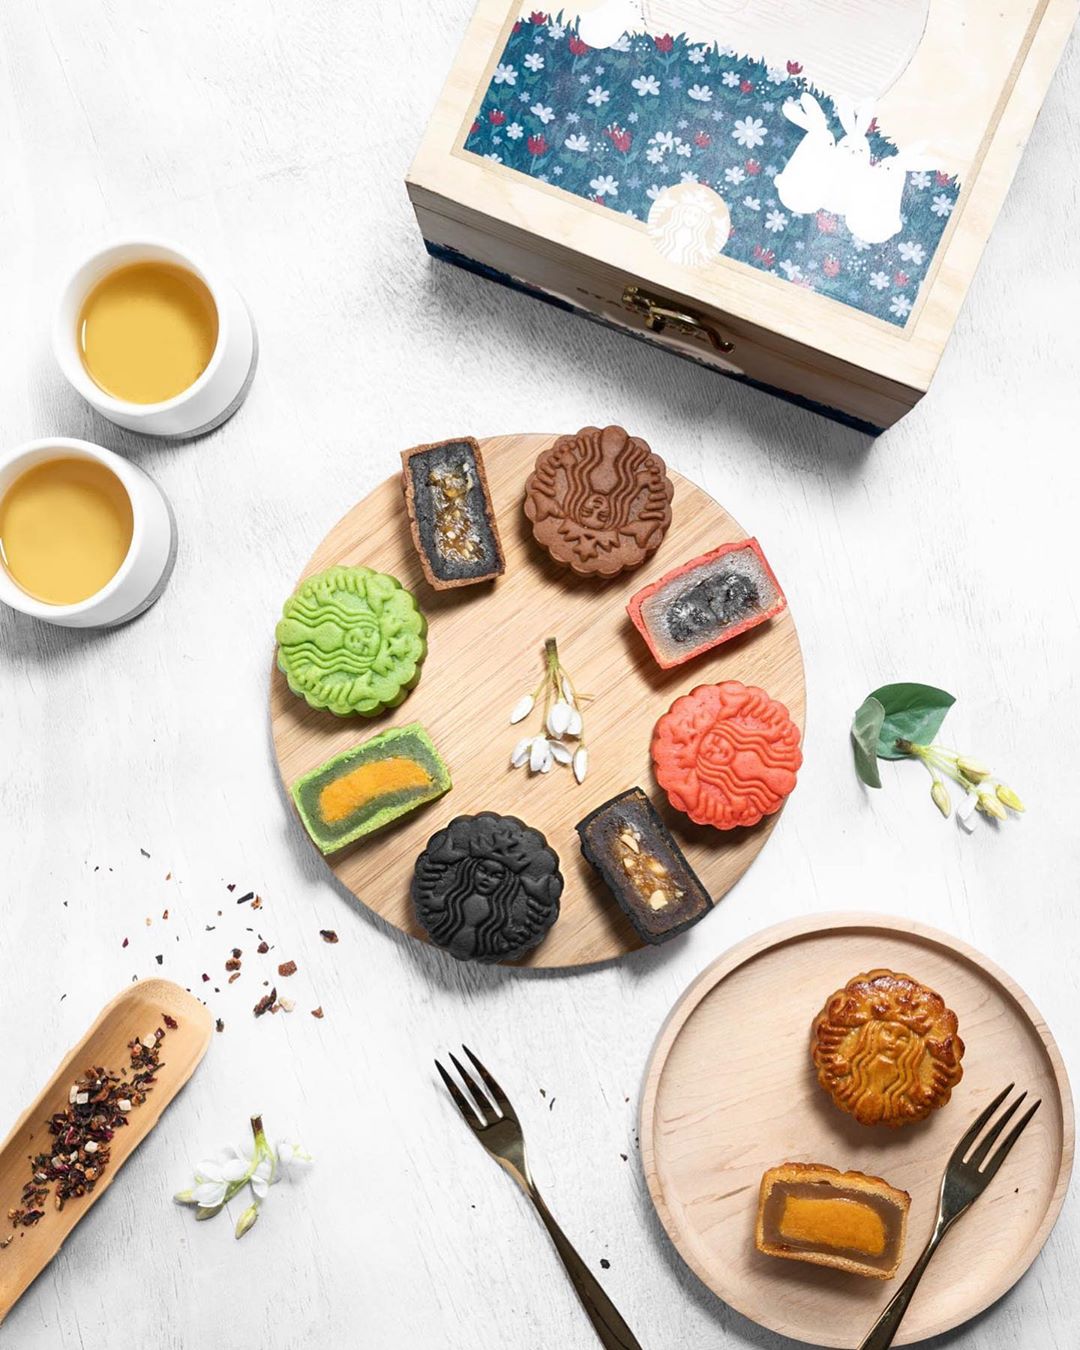 Starbucks joins in the Mid-Autumn fun with mooncakes of their own; including a coffee-infused flavour!